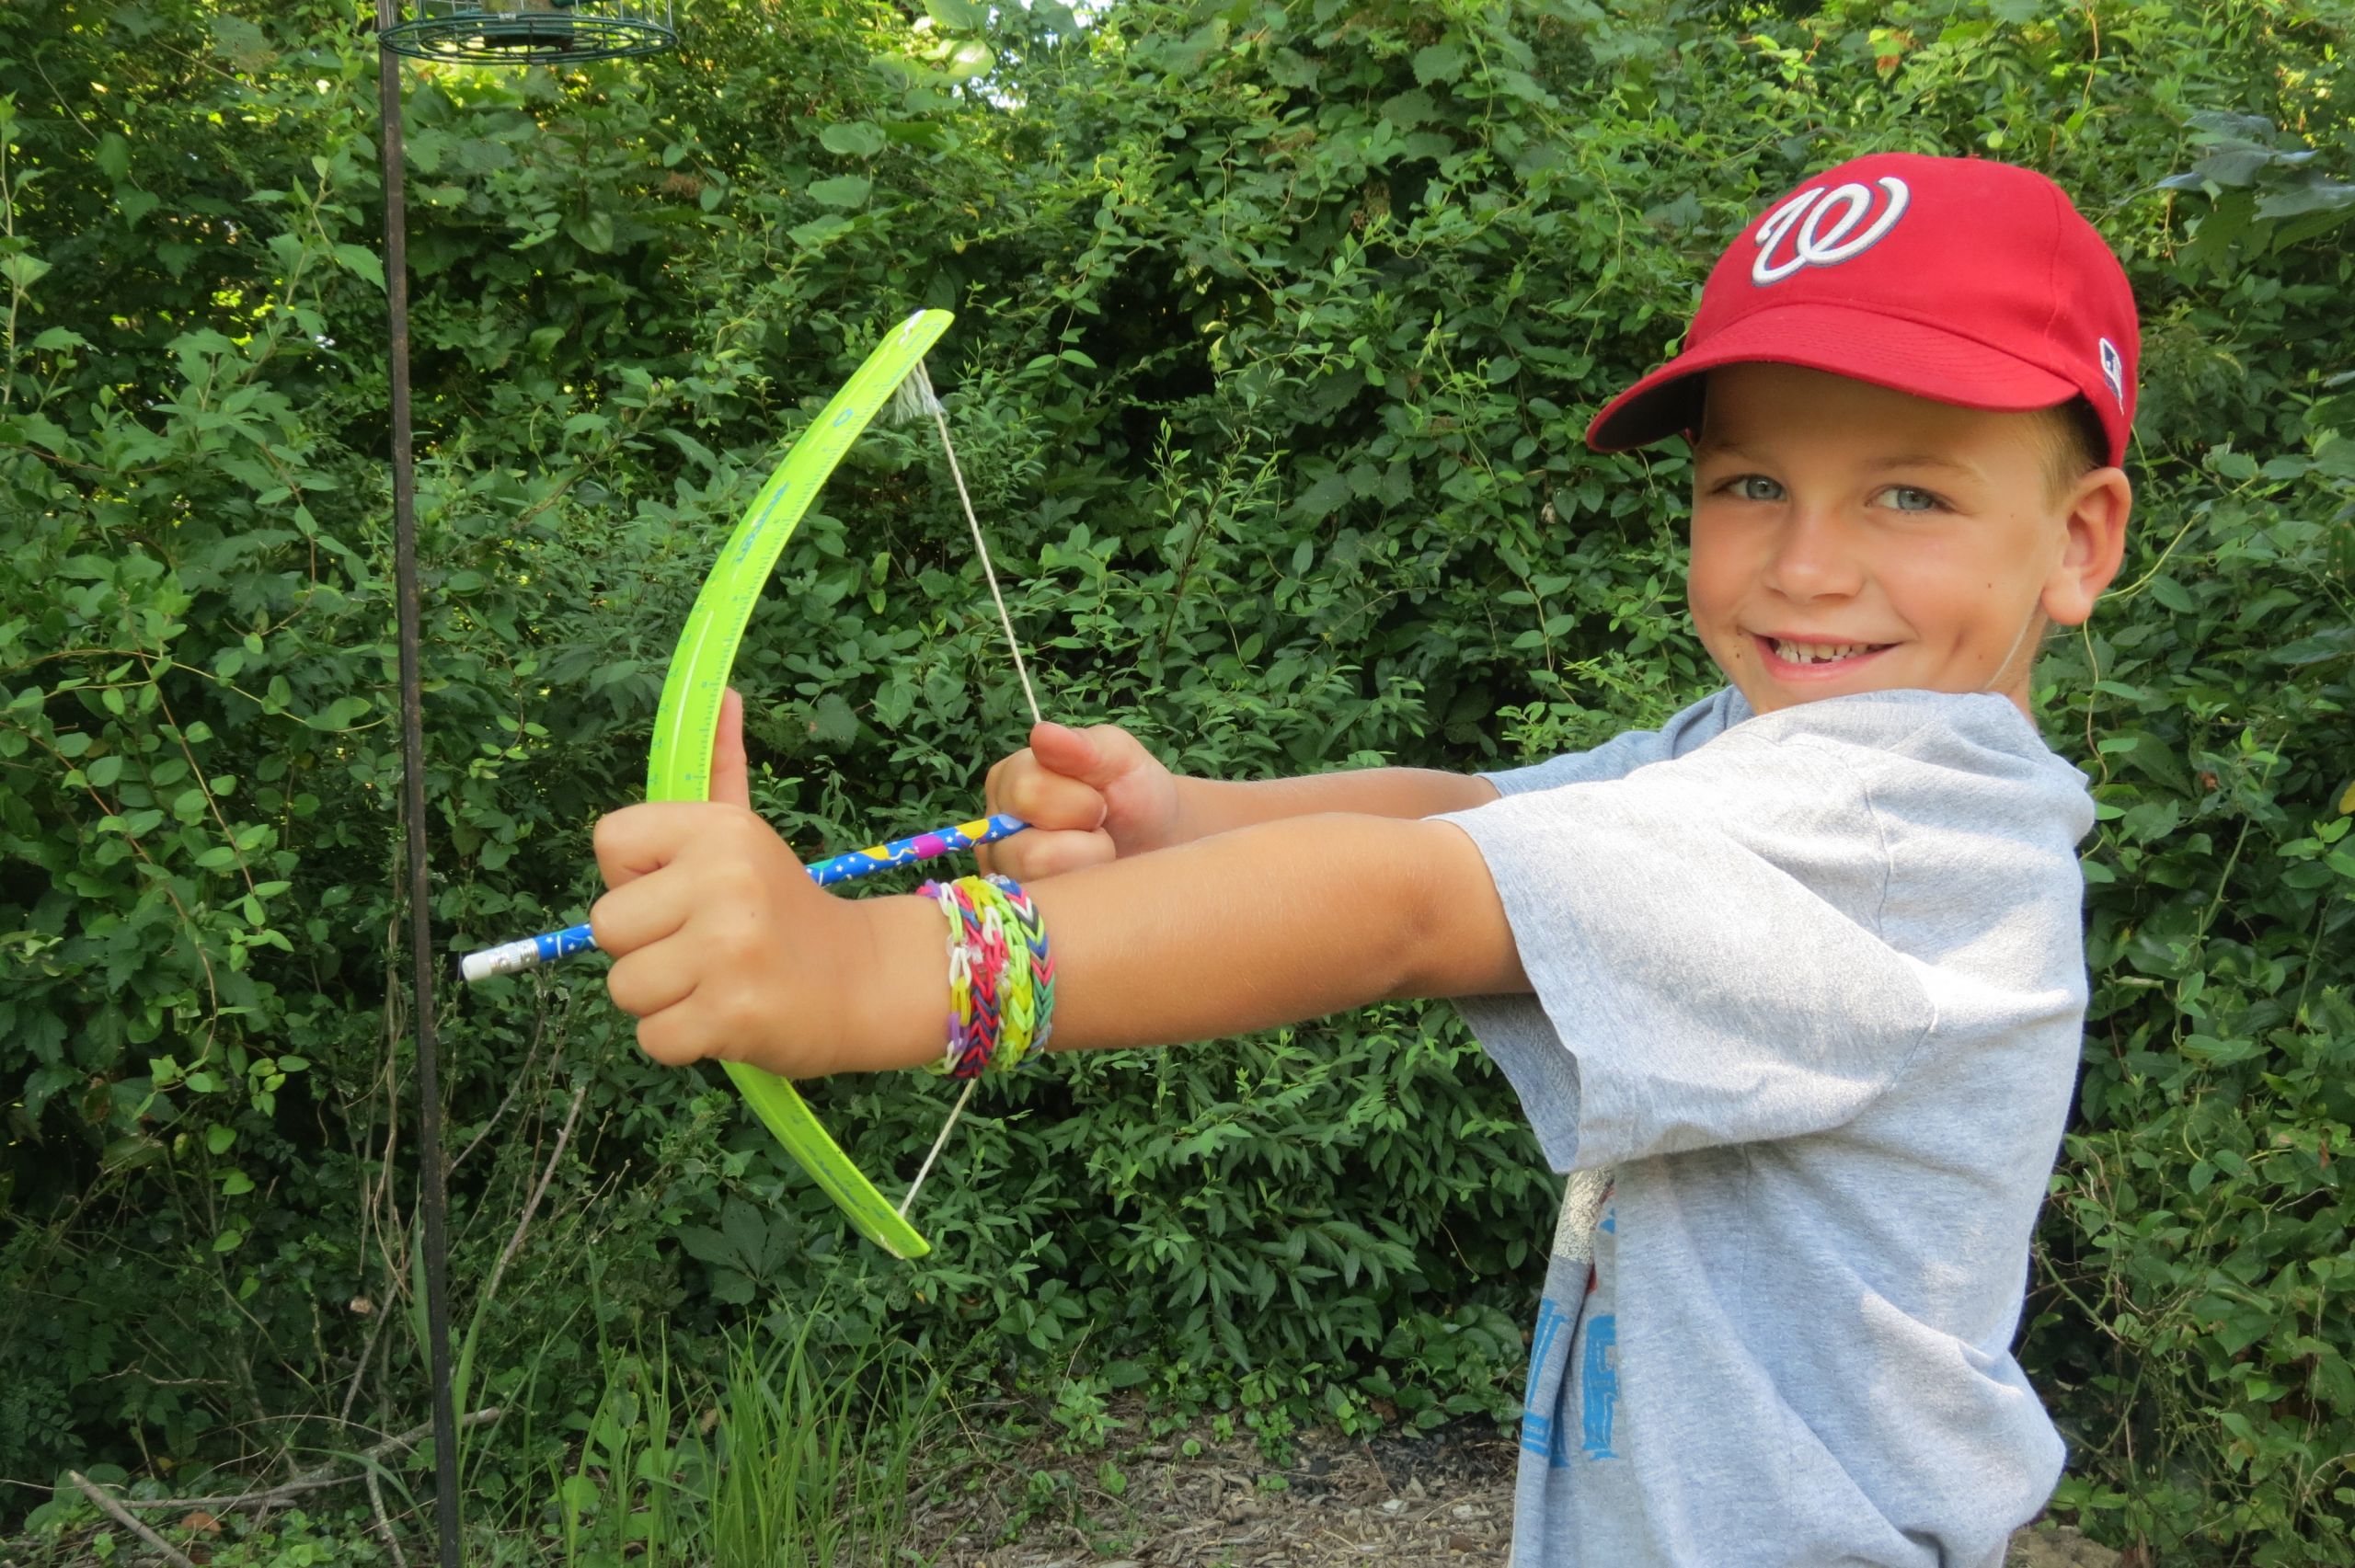 DIY Bow And Arrow For Kids
 Make Your Own Toy Bow and Arrow